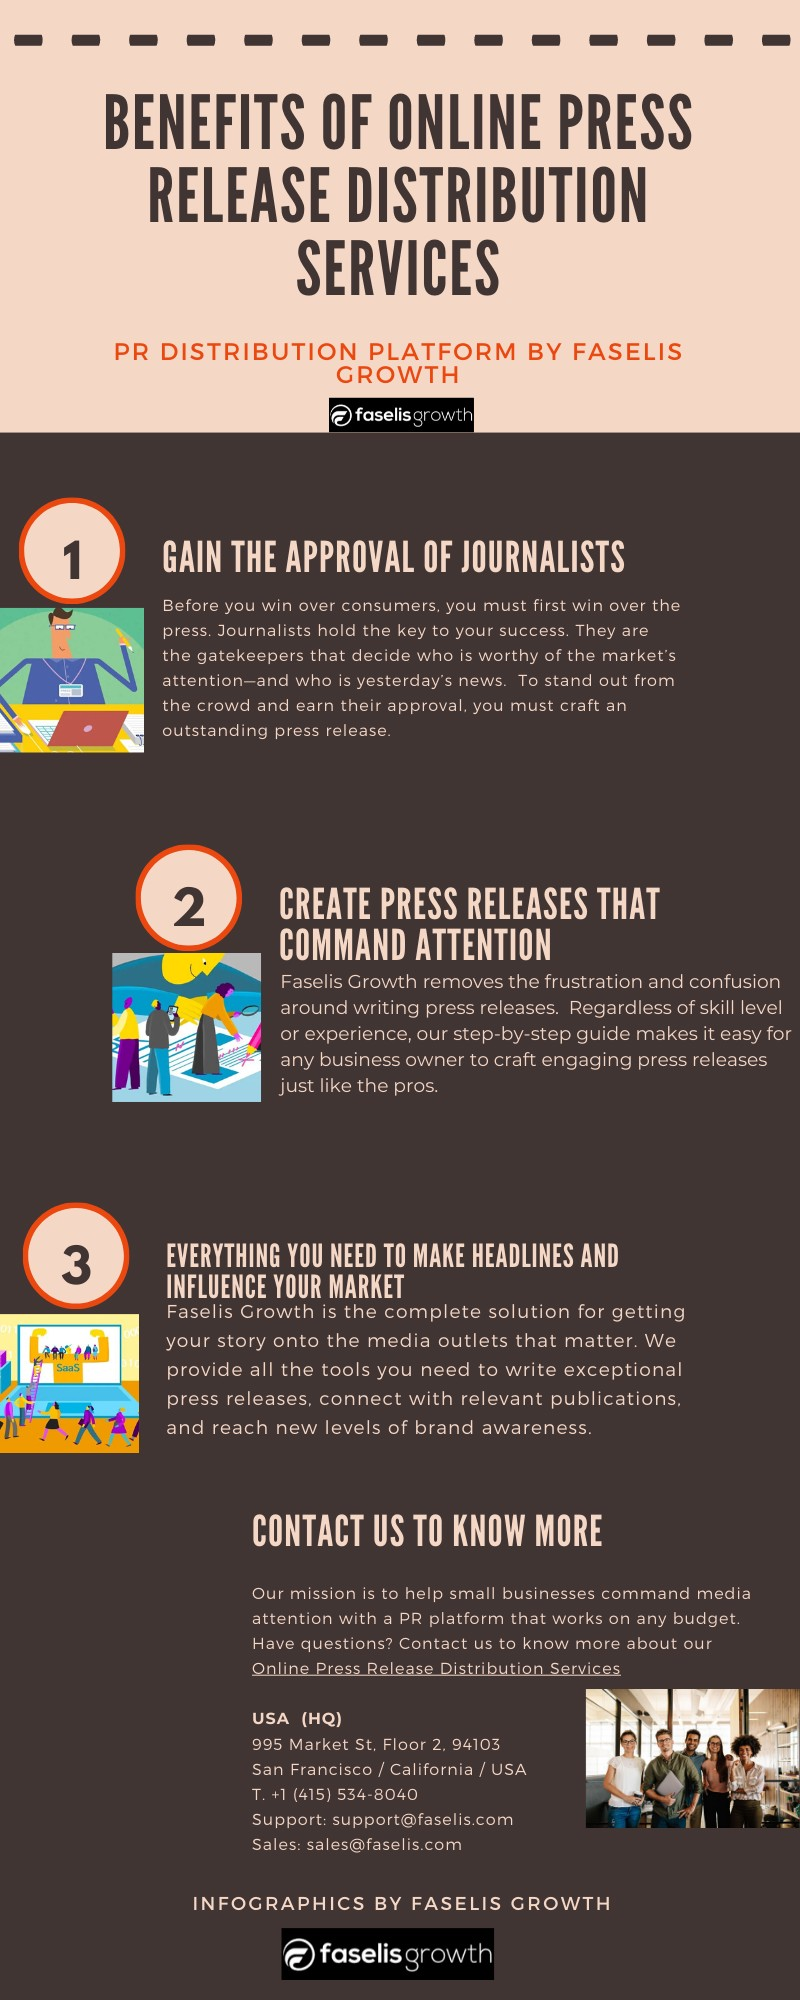 Benefits of Online Press Release Distribution Services